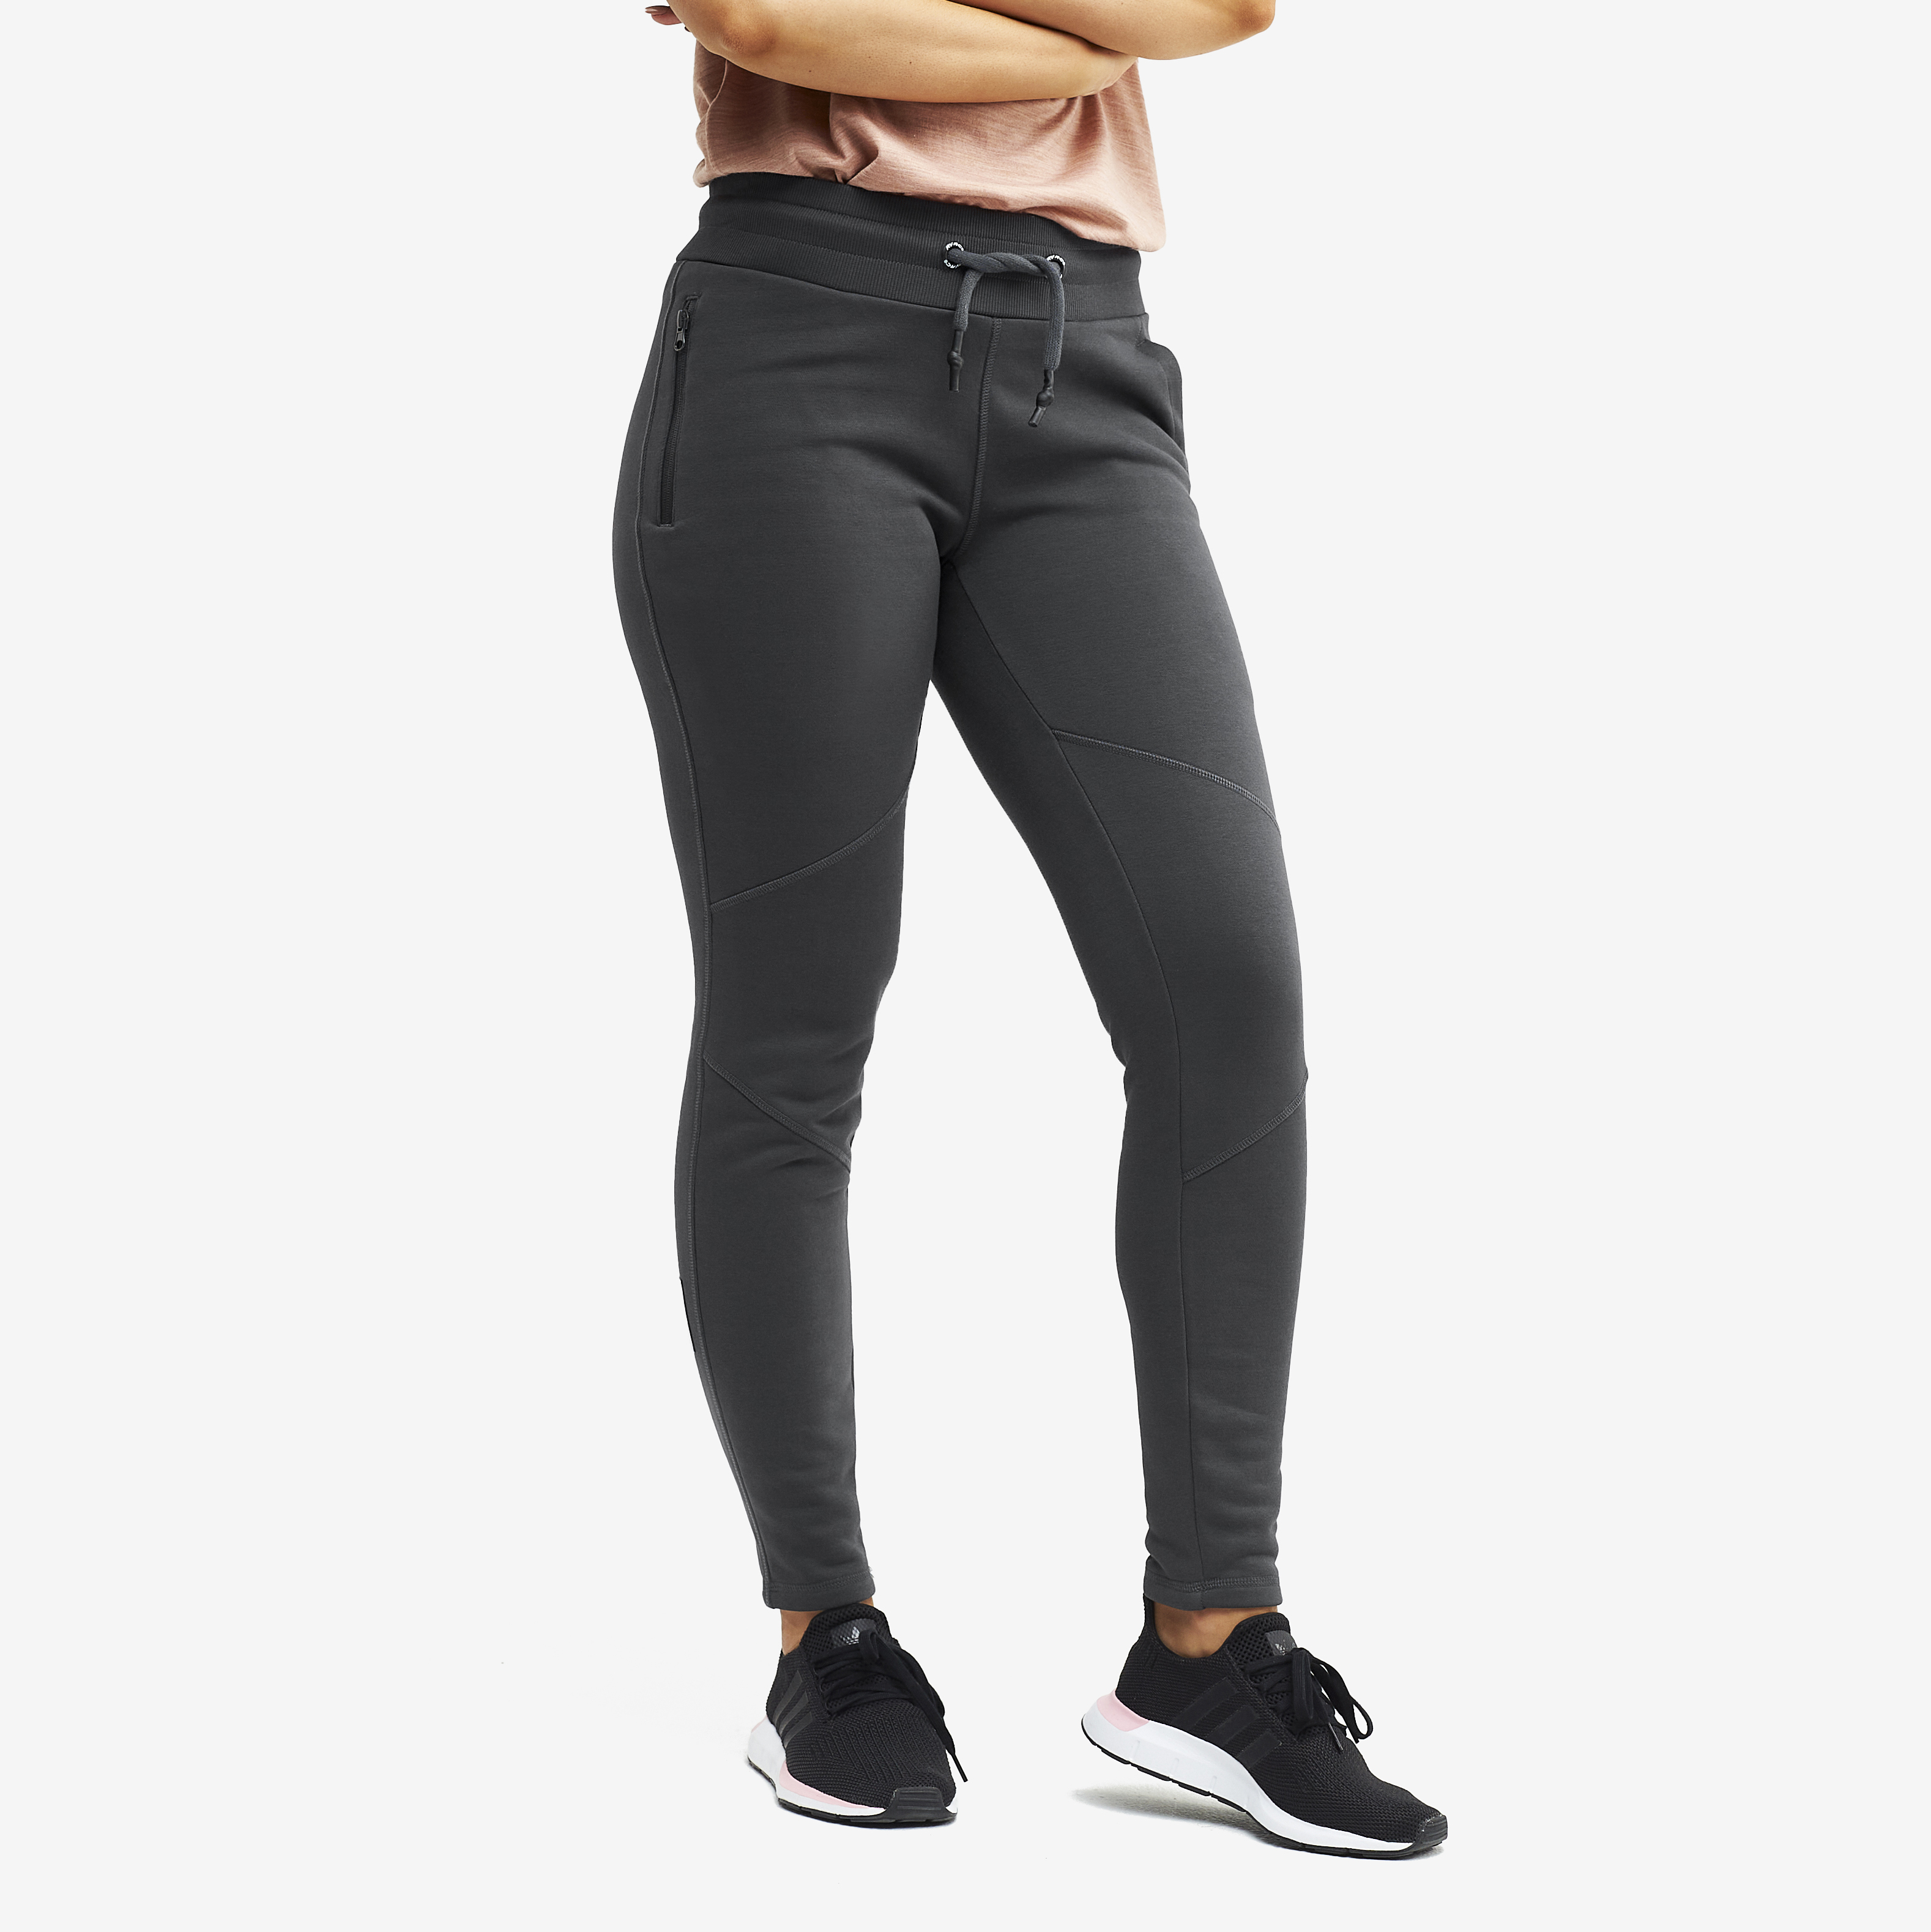 Elements Pants Anthracite Mujeres